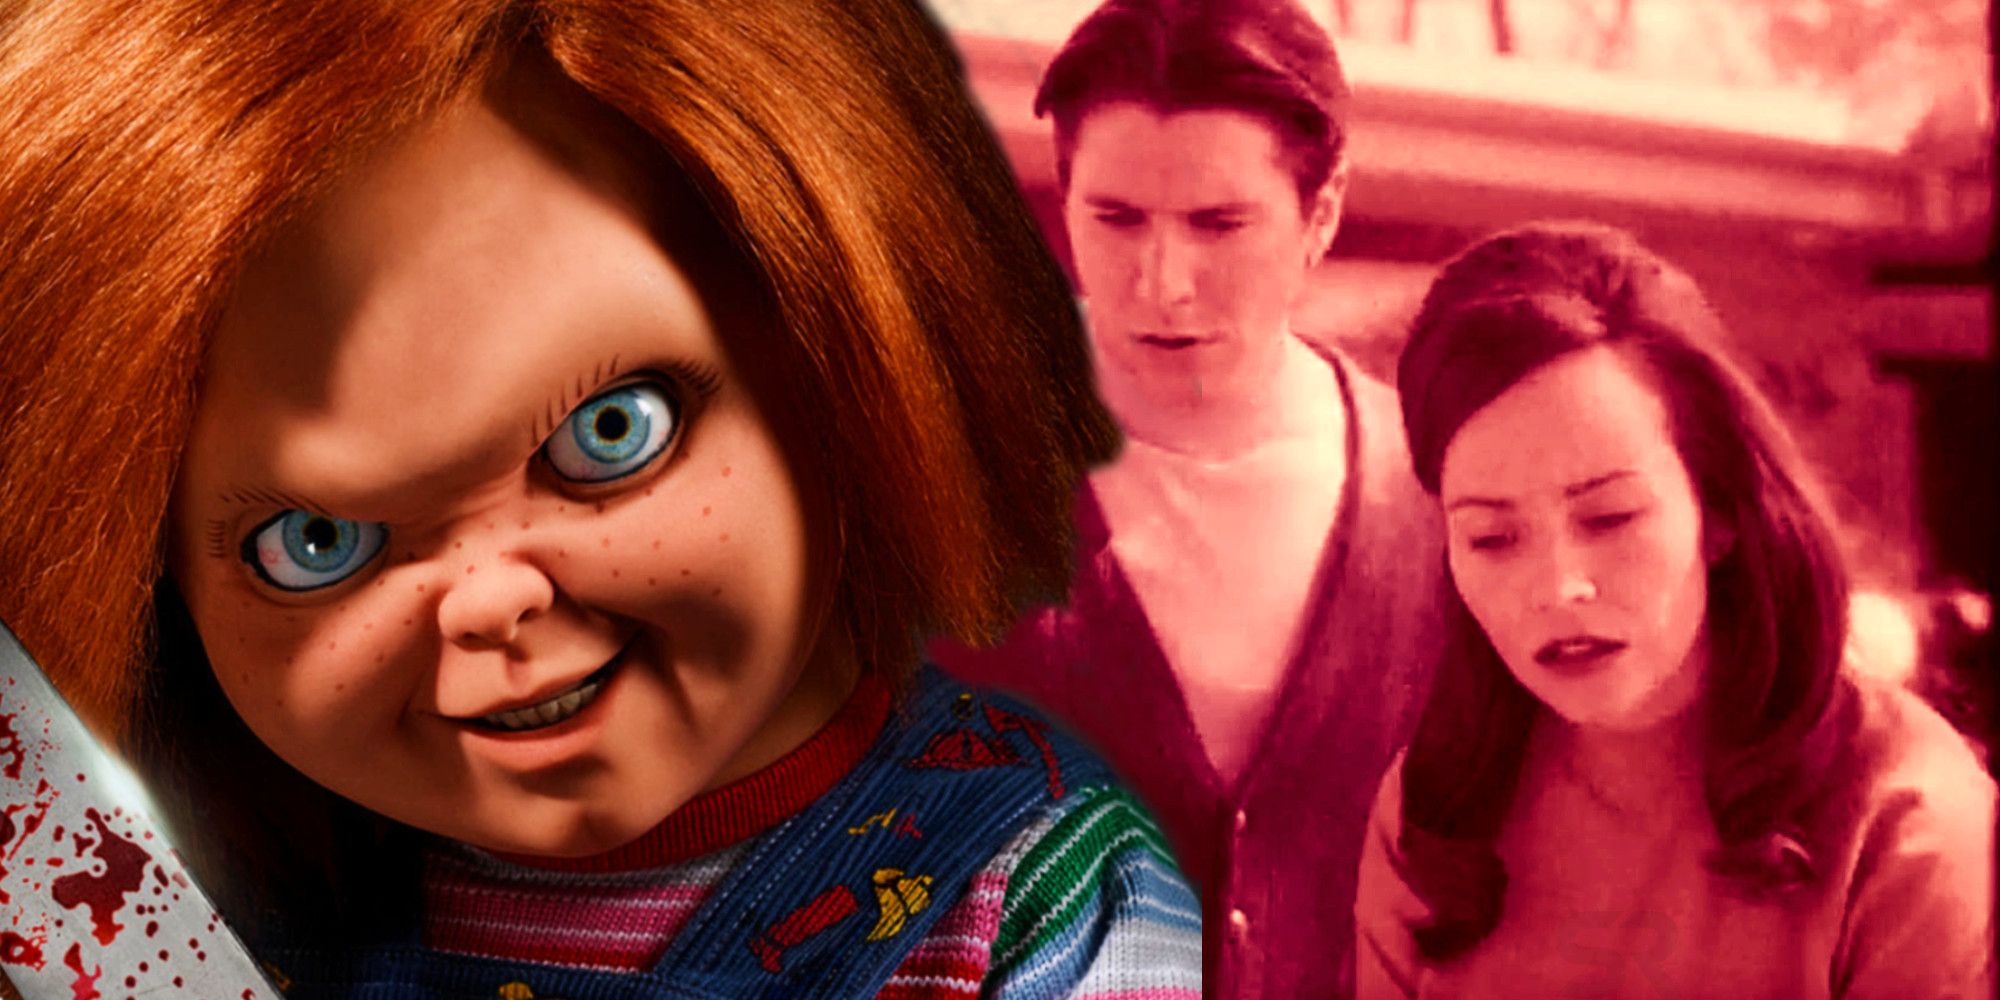 Chucky Episode 3 Confirms A Classic Theory About His First Kill